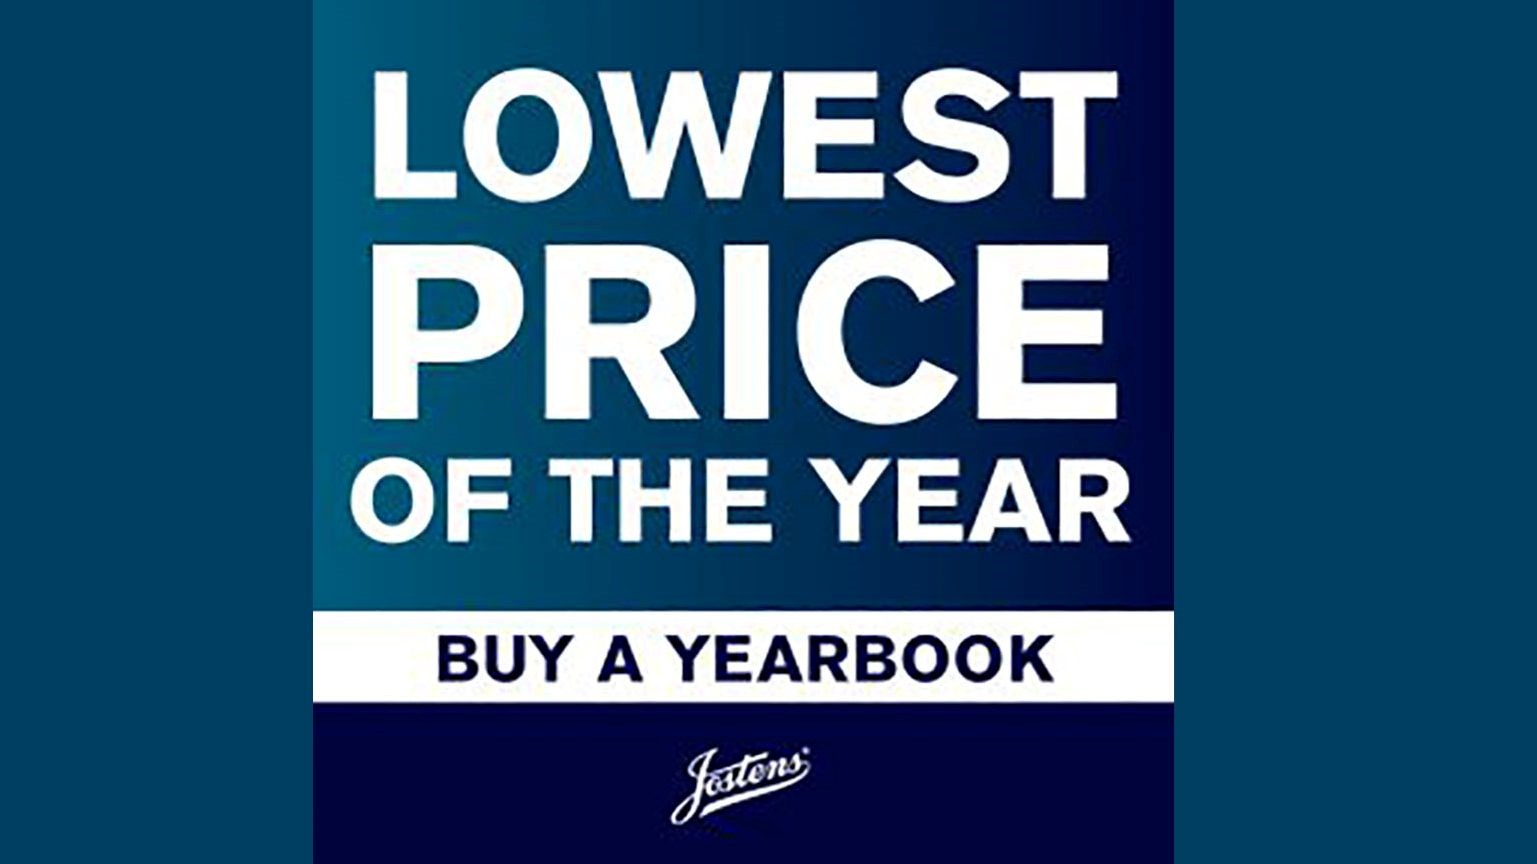 Lowest Price of the Year, Buy a Yearbook from Jostens